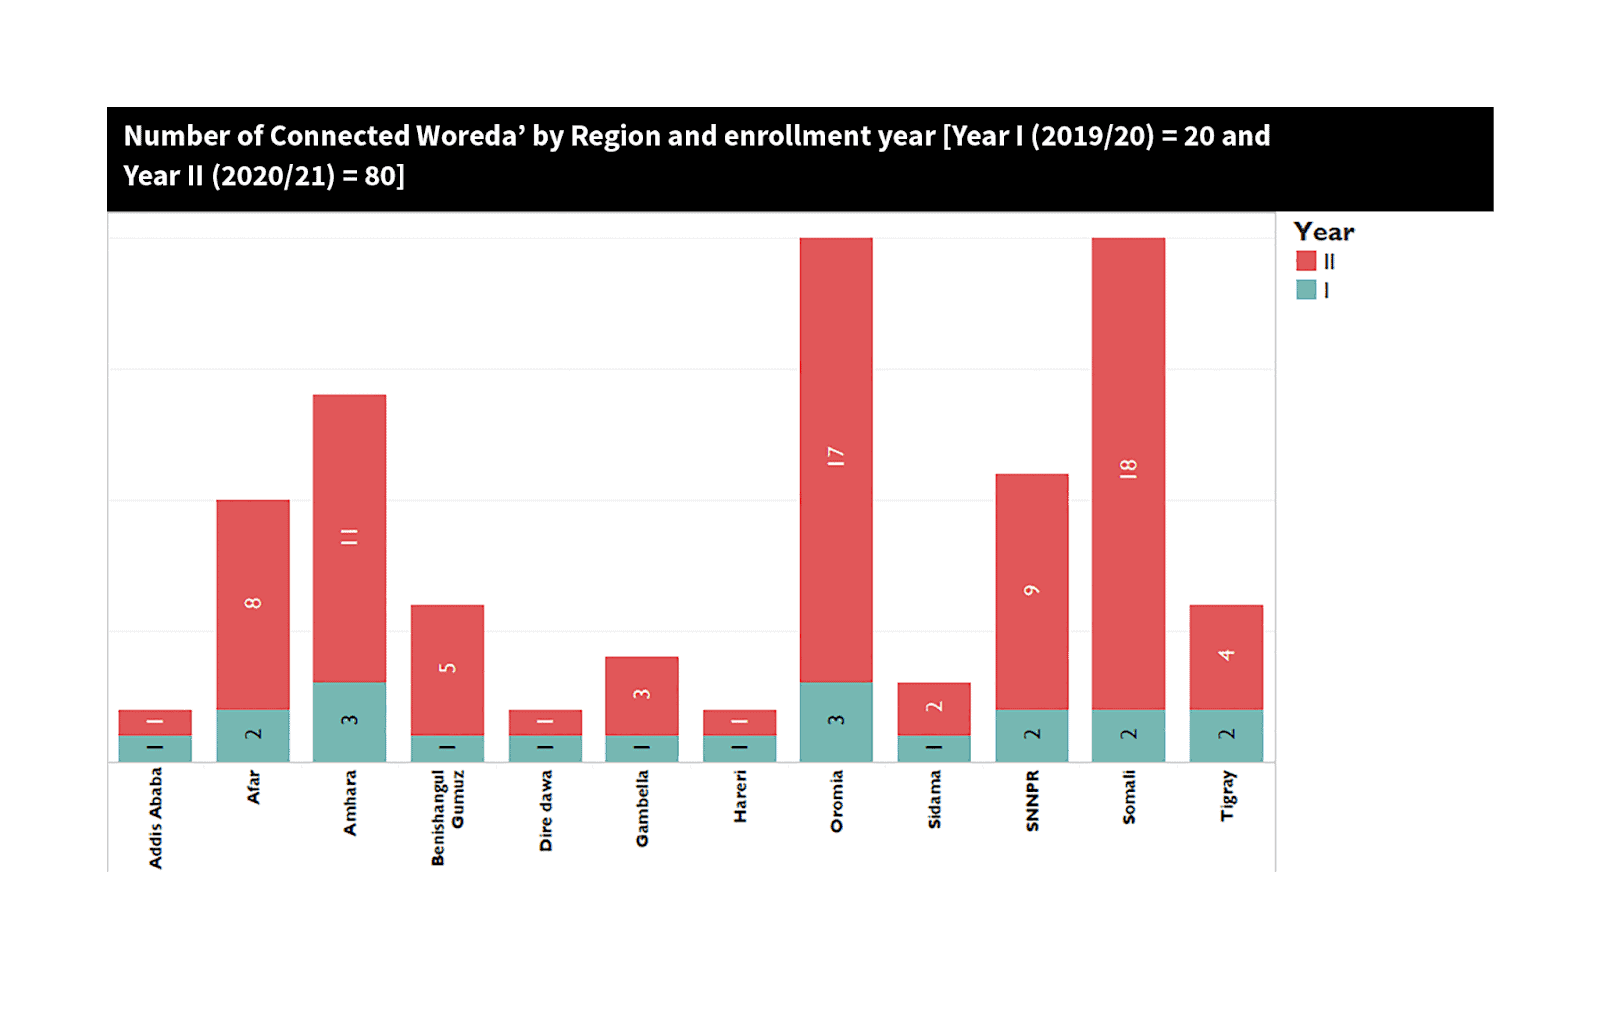 Graph of DHA connected Woredas by number and enrollment year